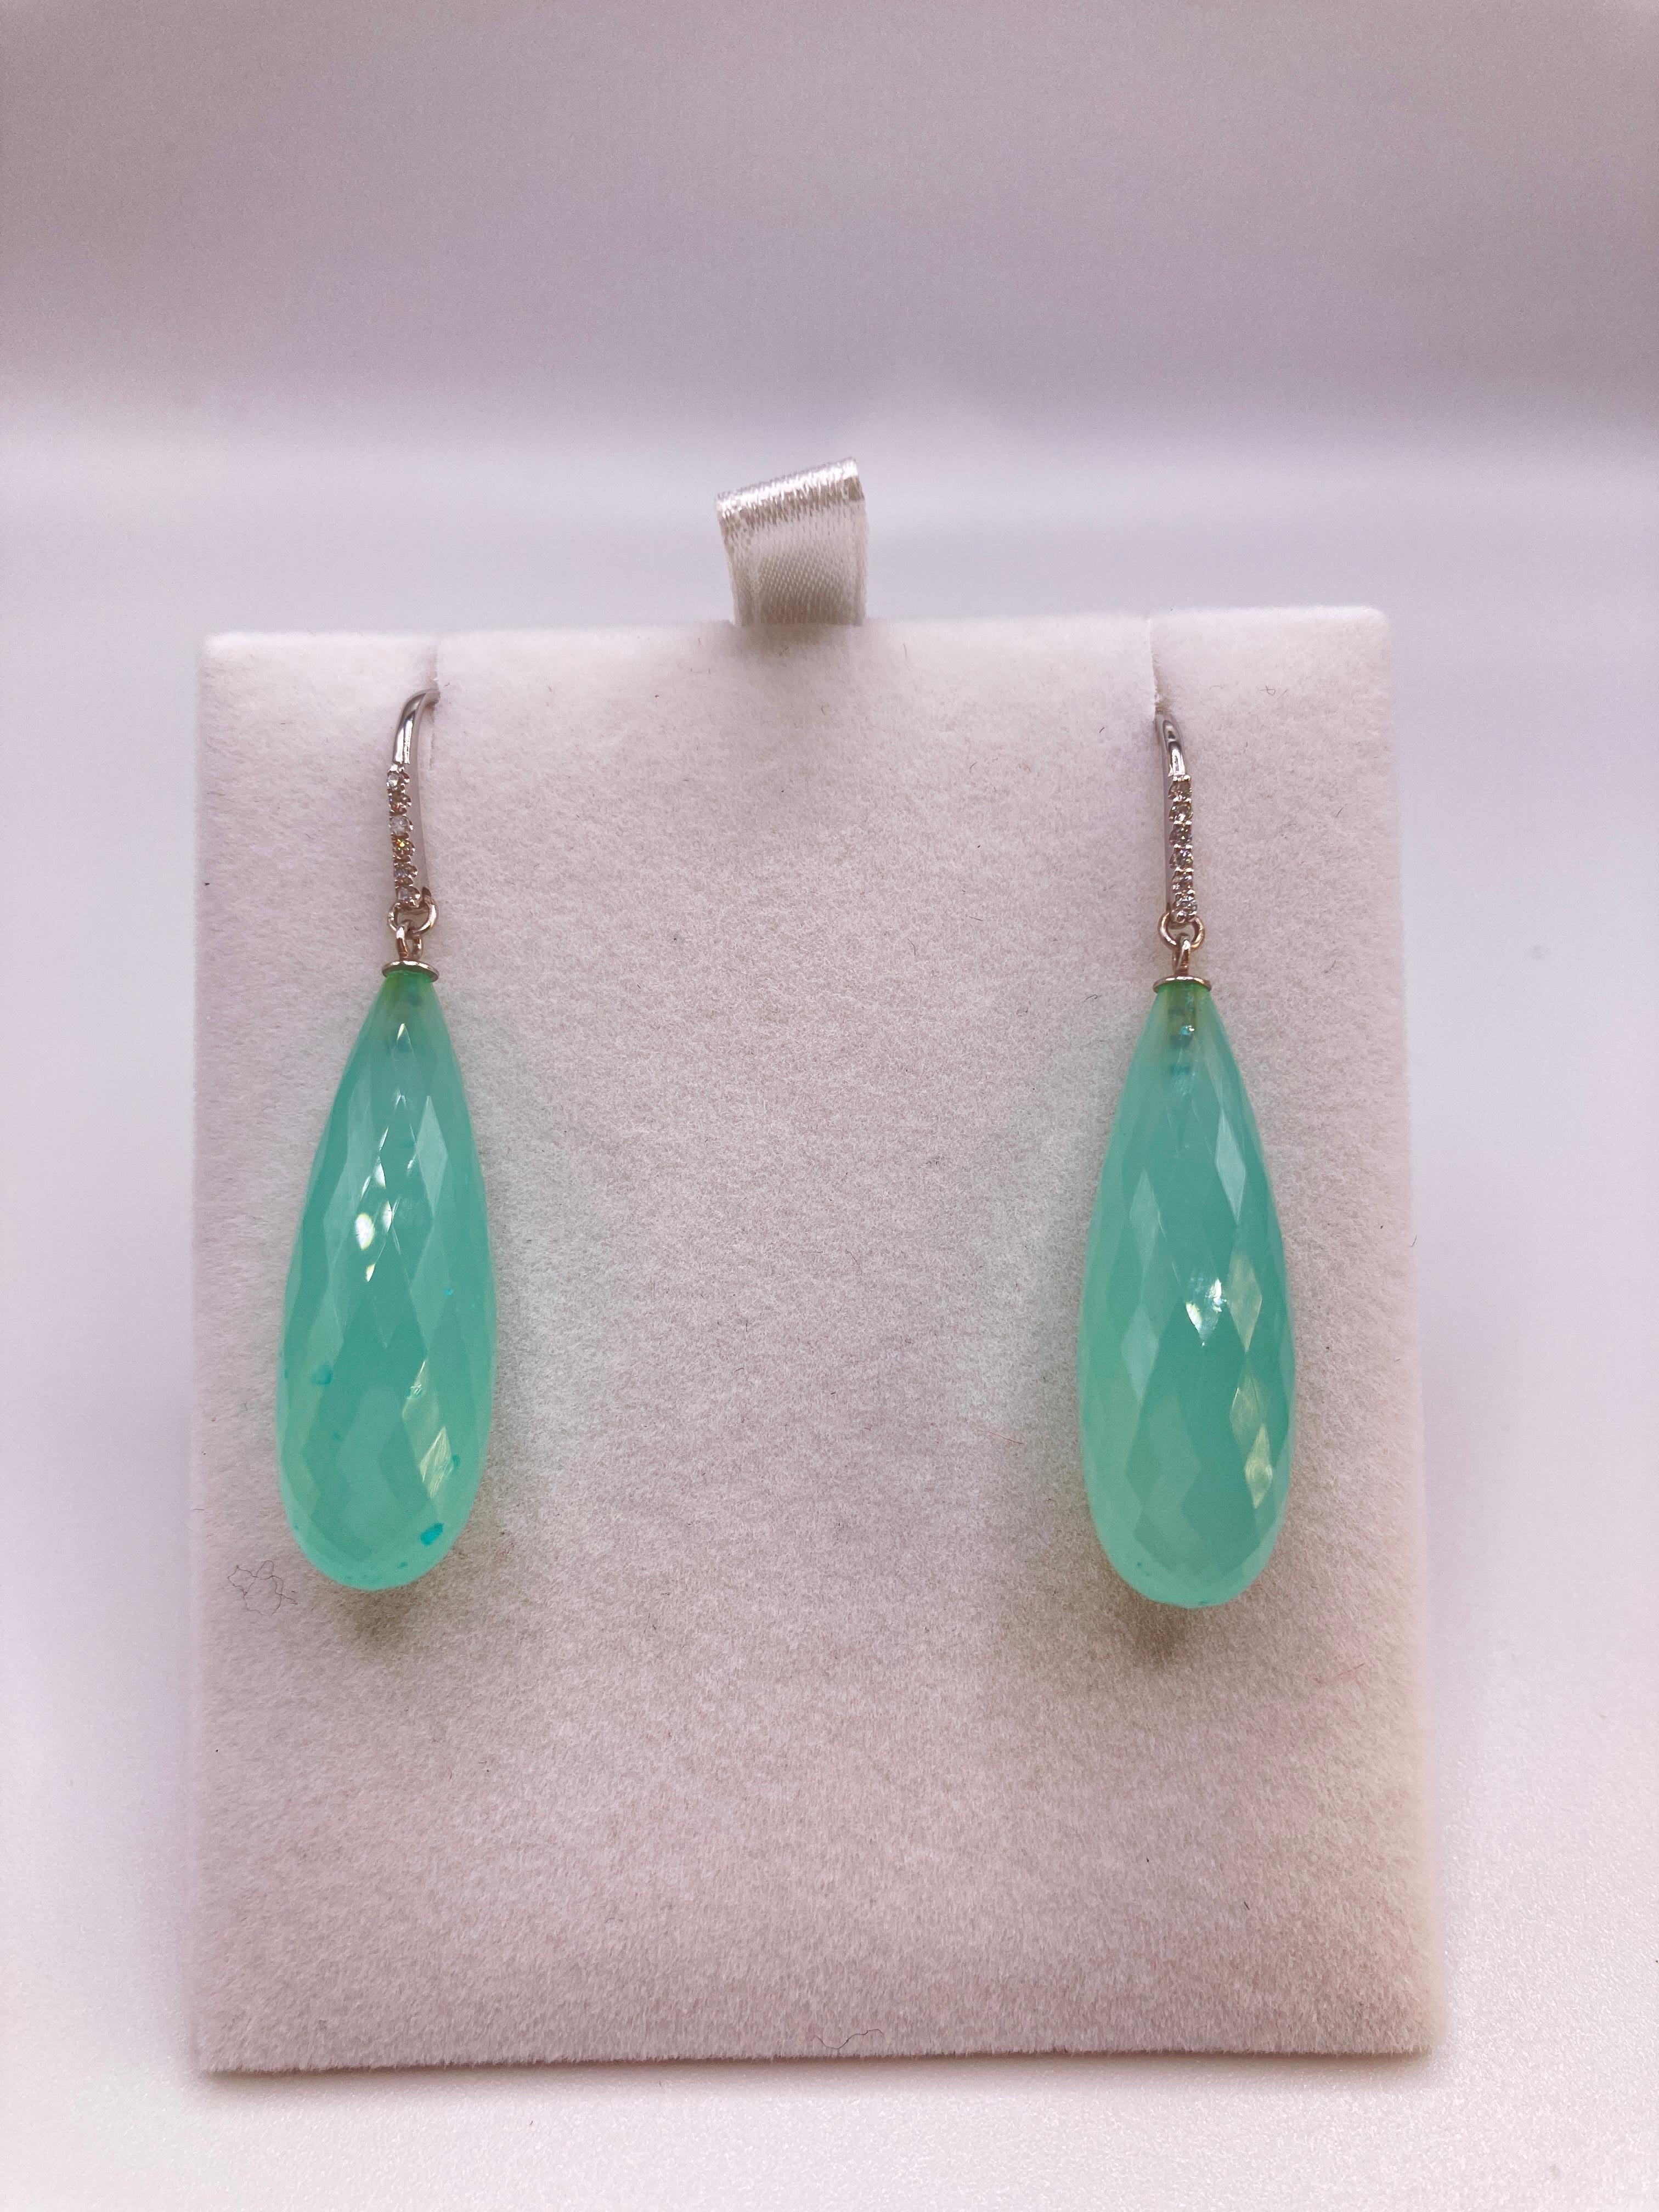 These lovely faceted 20 carat each Chalcedony perfectly math color wise and are not too heavy on the ear lobe at 4.4 grams. The 14kt white gold and diamonds set make it more evening but can also be worn casually.